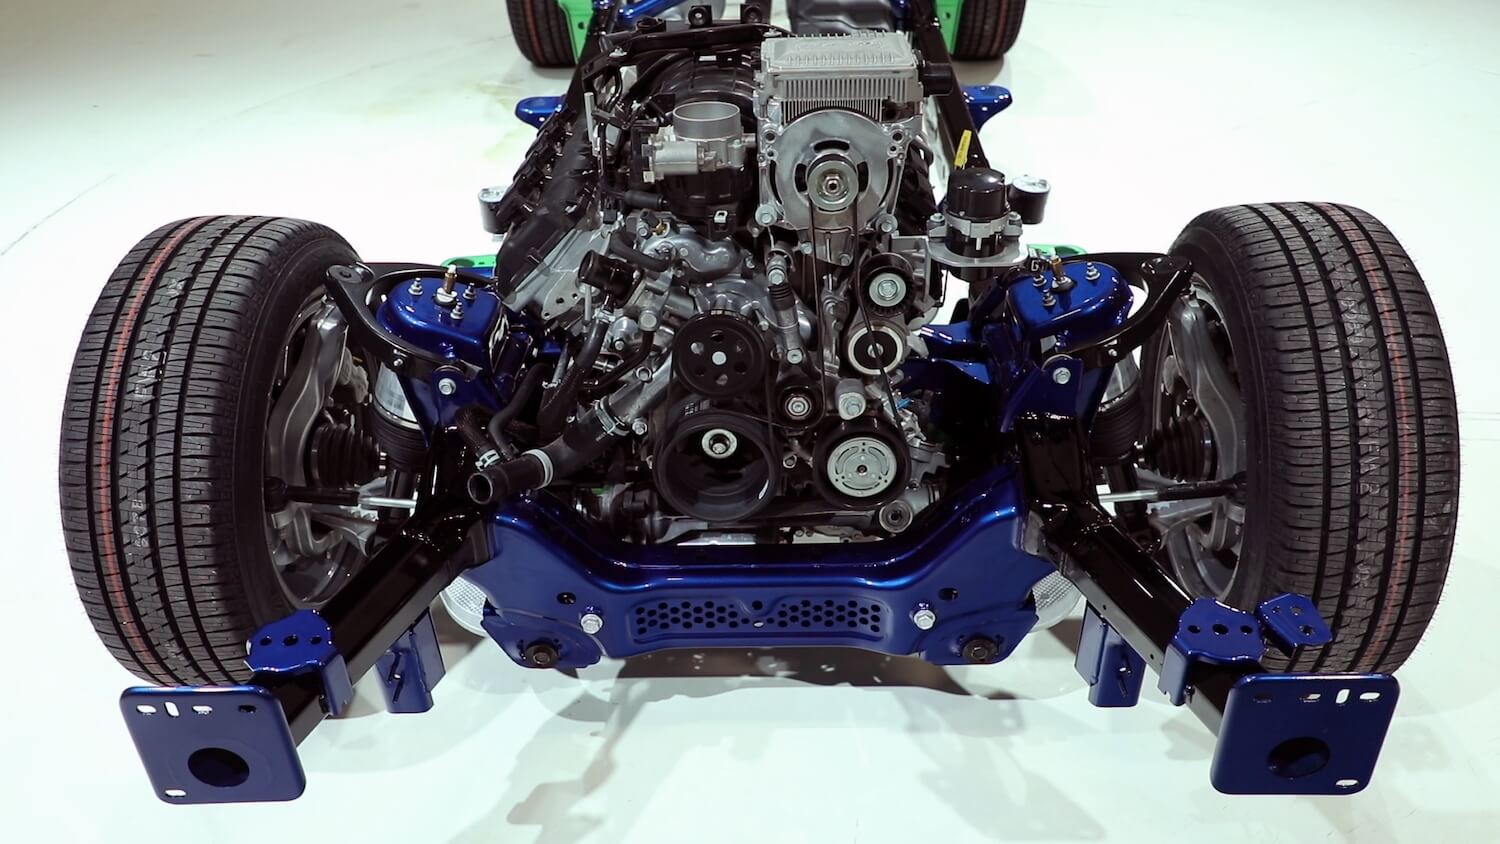 The exposed 5.7-liter Hemi engine in a Ram 1500 pickup truck chassis